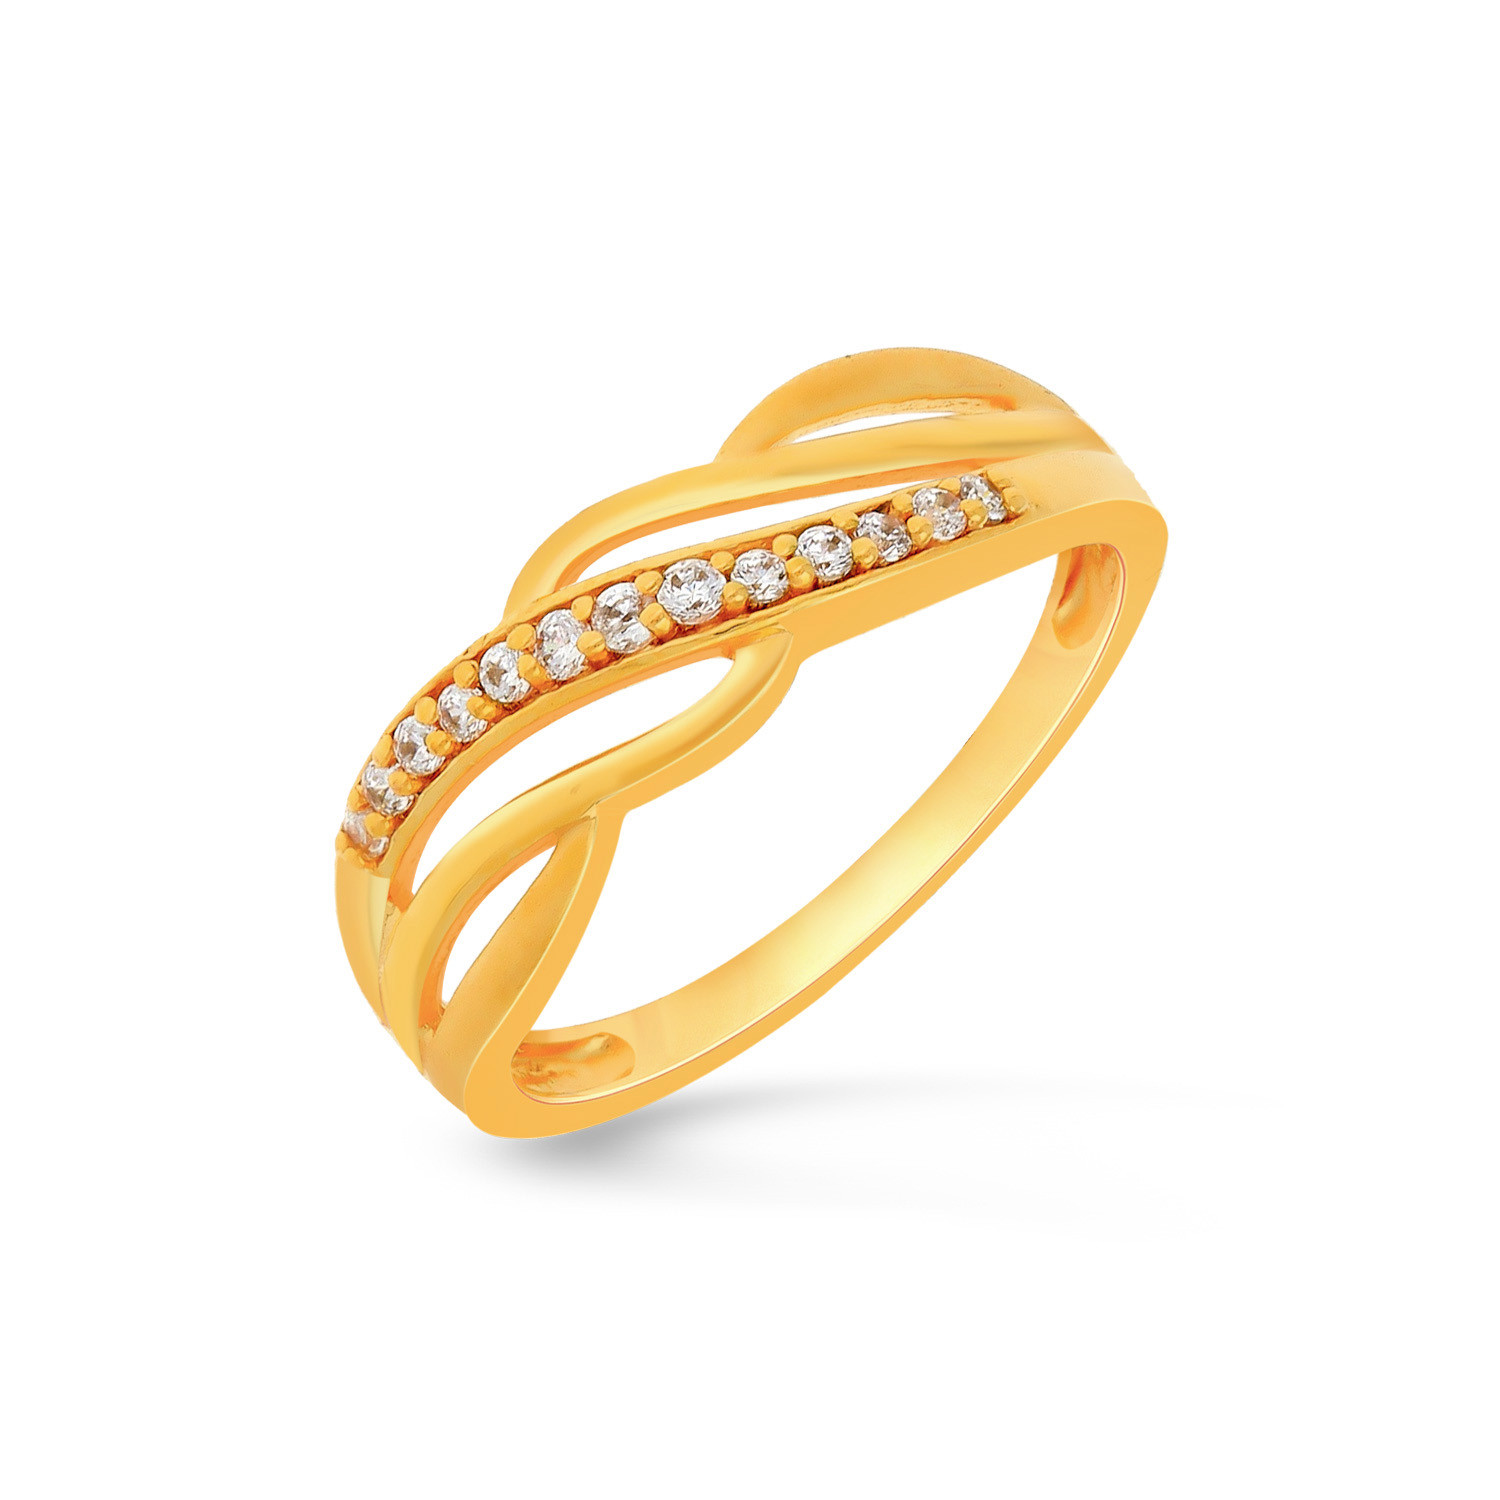 Malabar Gold Ring Designs with Price